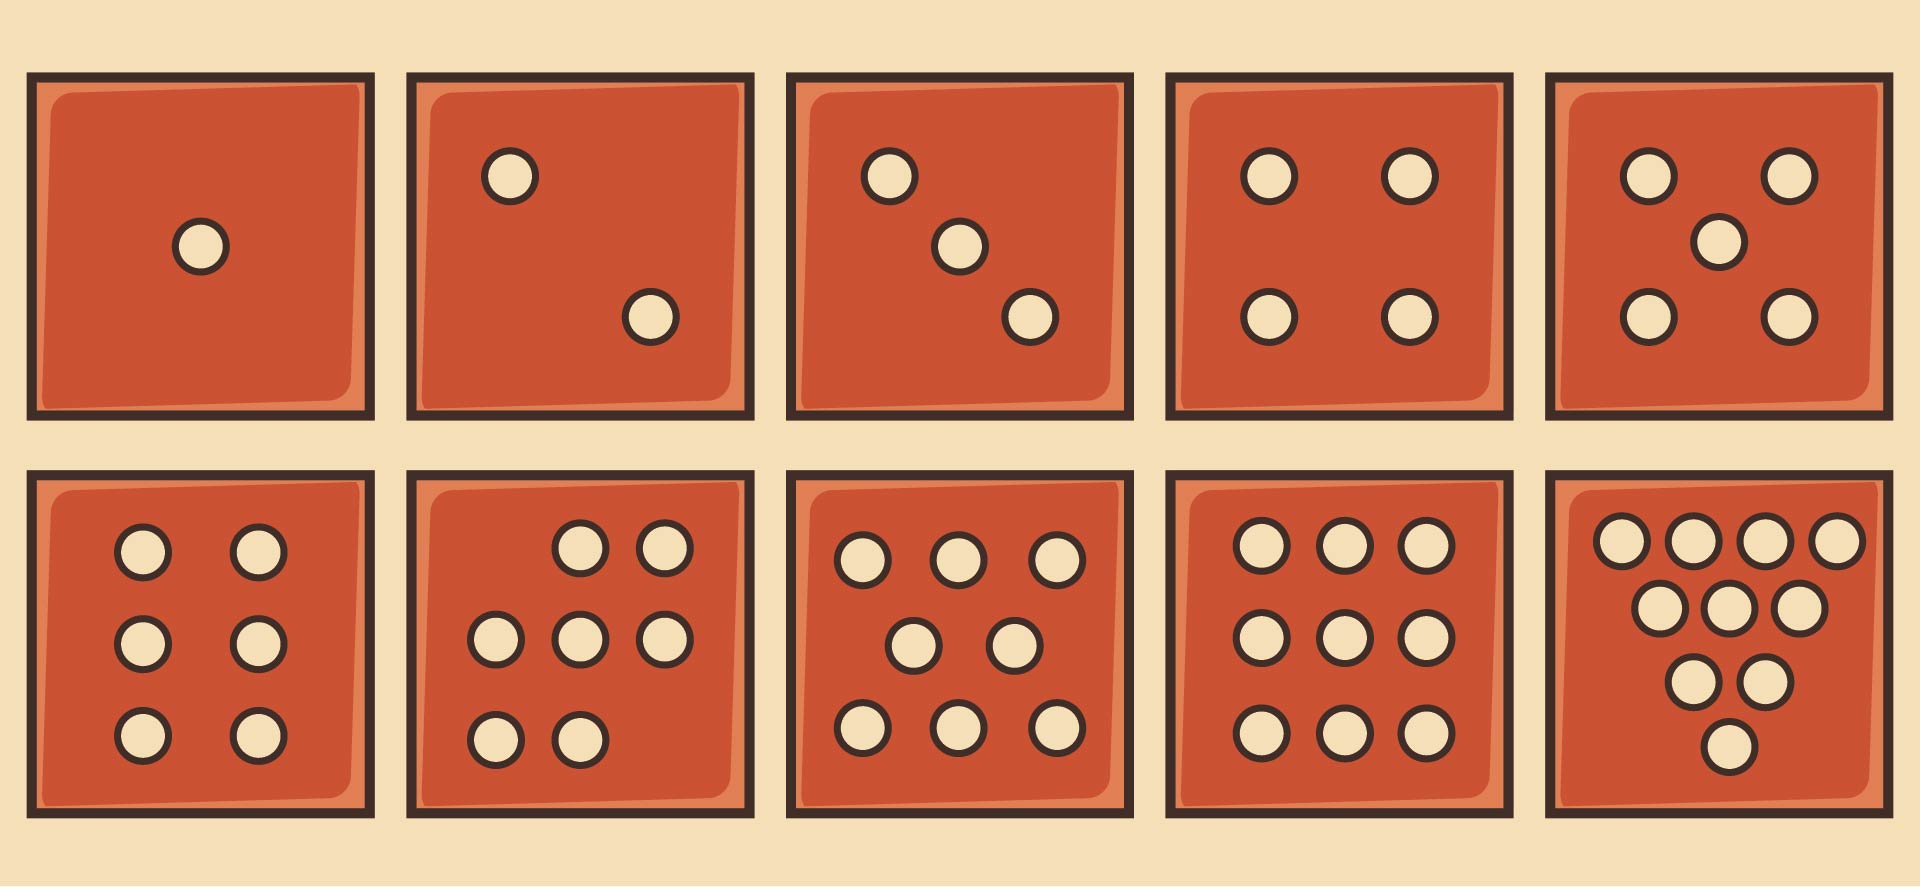 5 Best Images Of Printable Dot Cards 1 20 Free Printable Number Dot